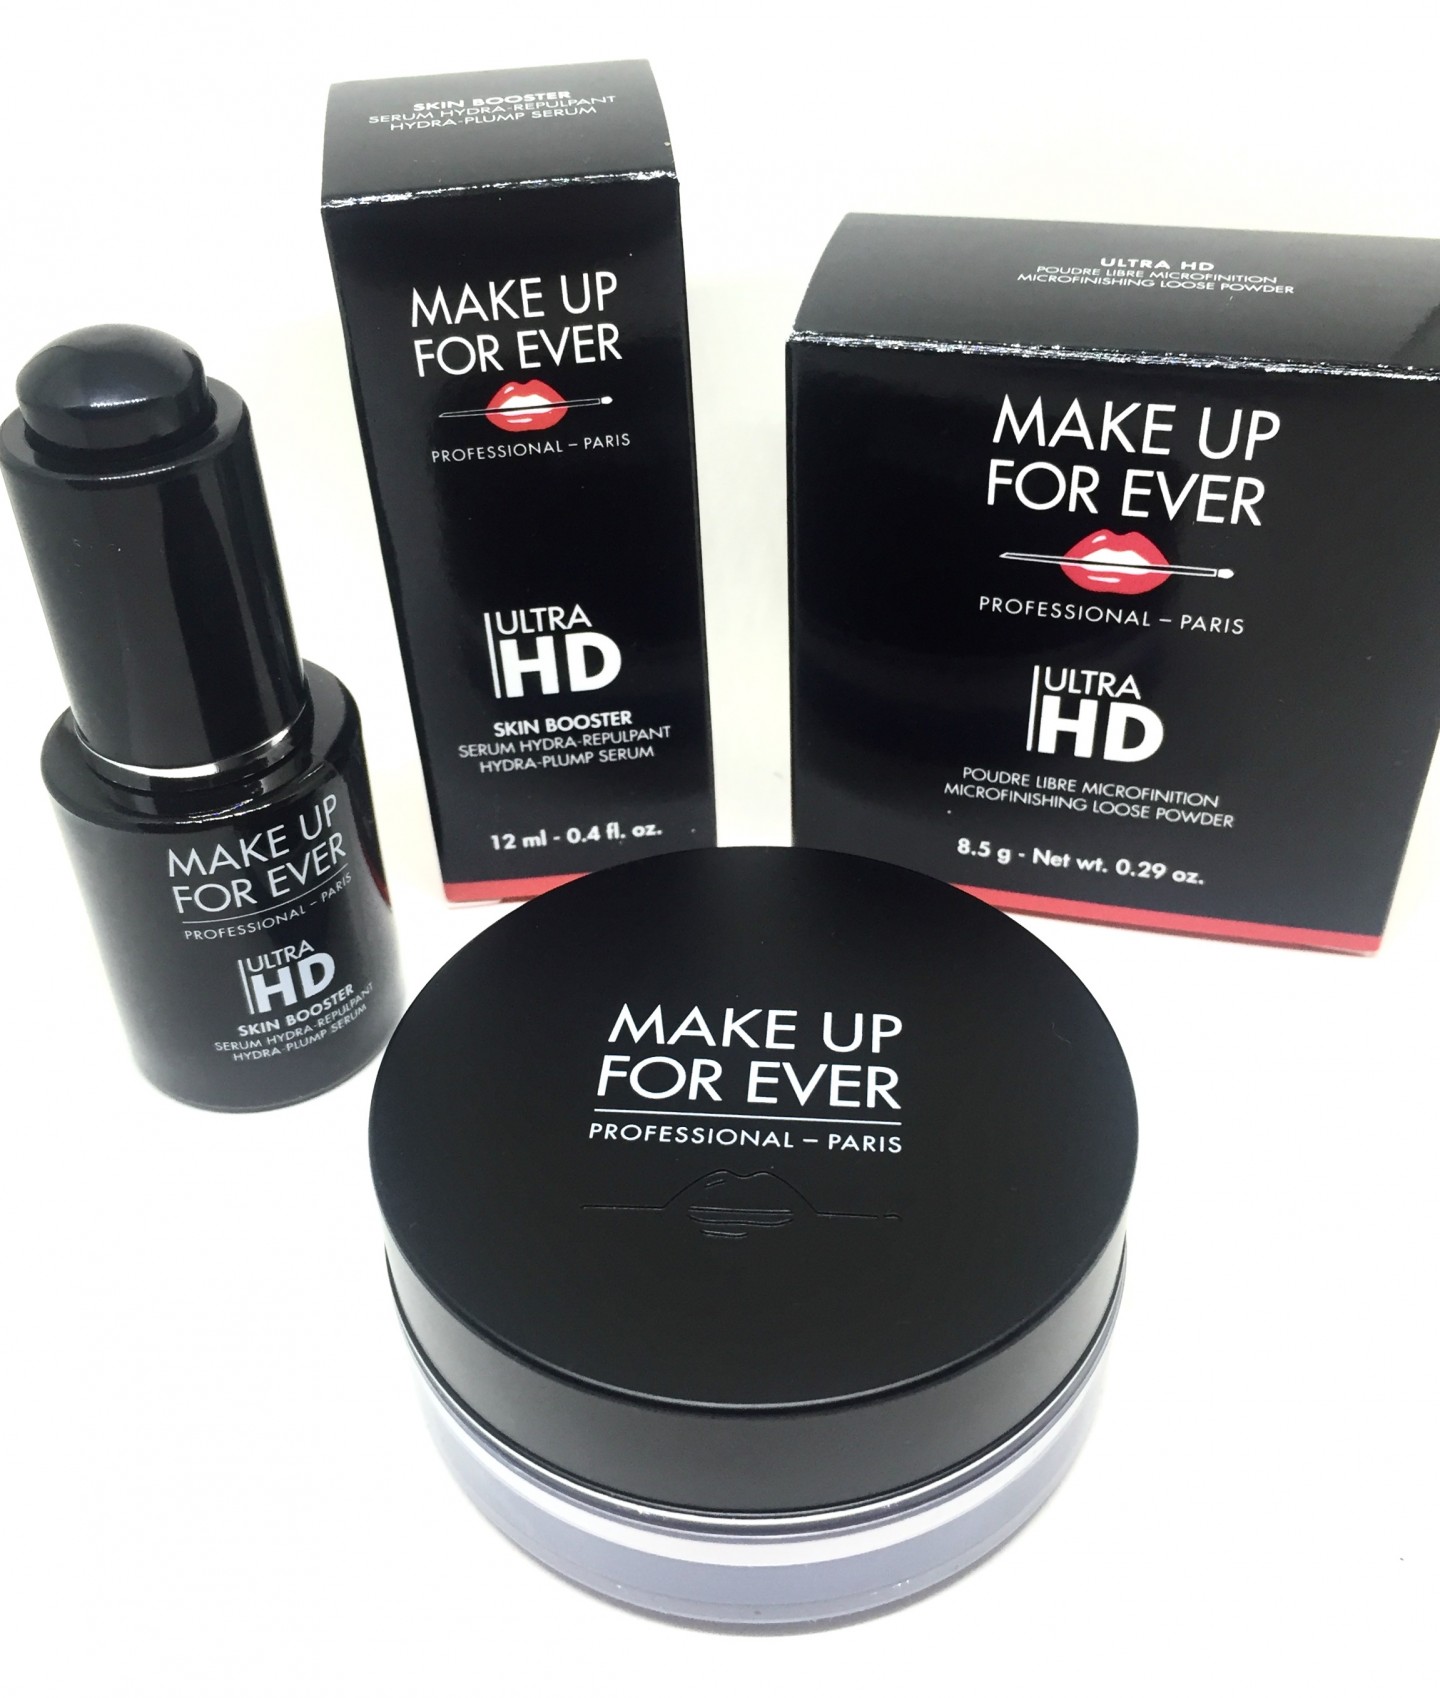 Make Up For Ever’s Ultra HD Skin Booster Serum and Microfinishing Loose Powder